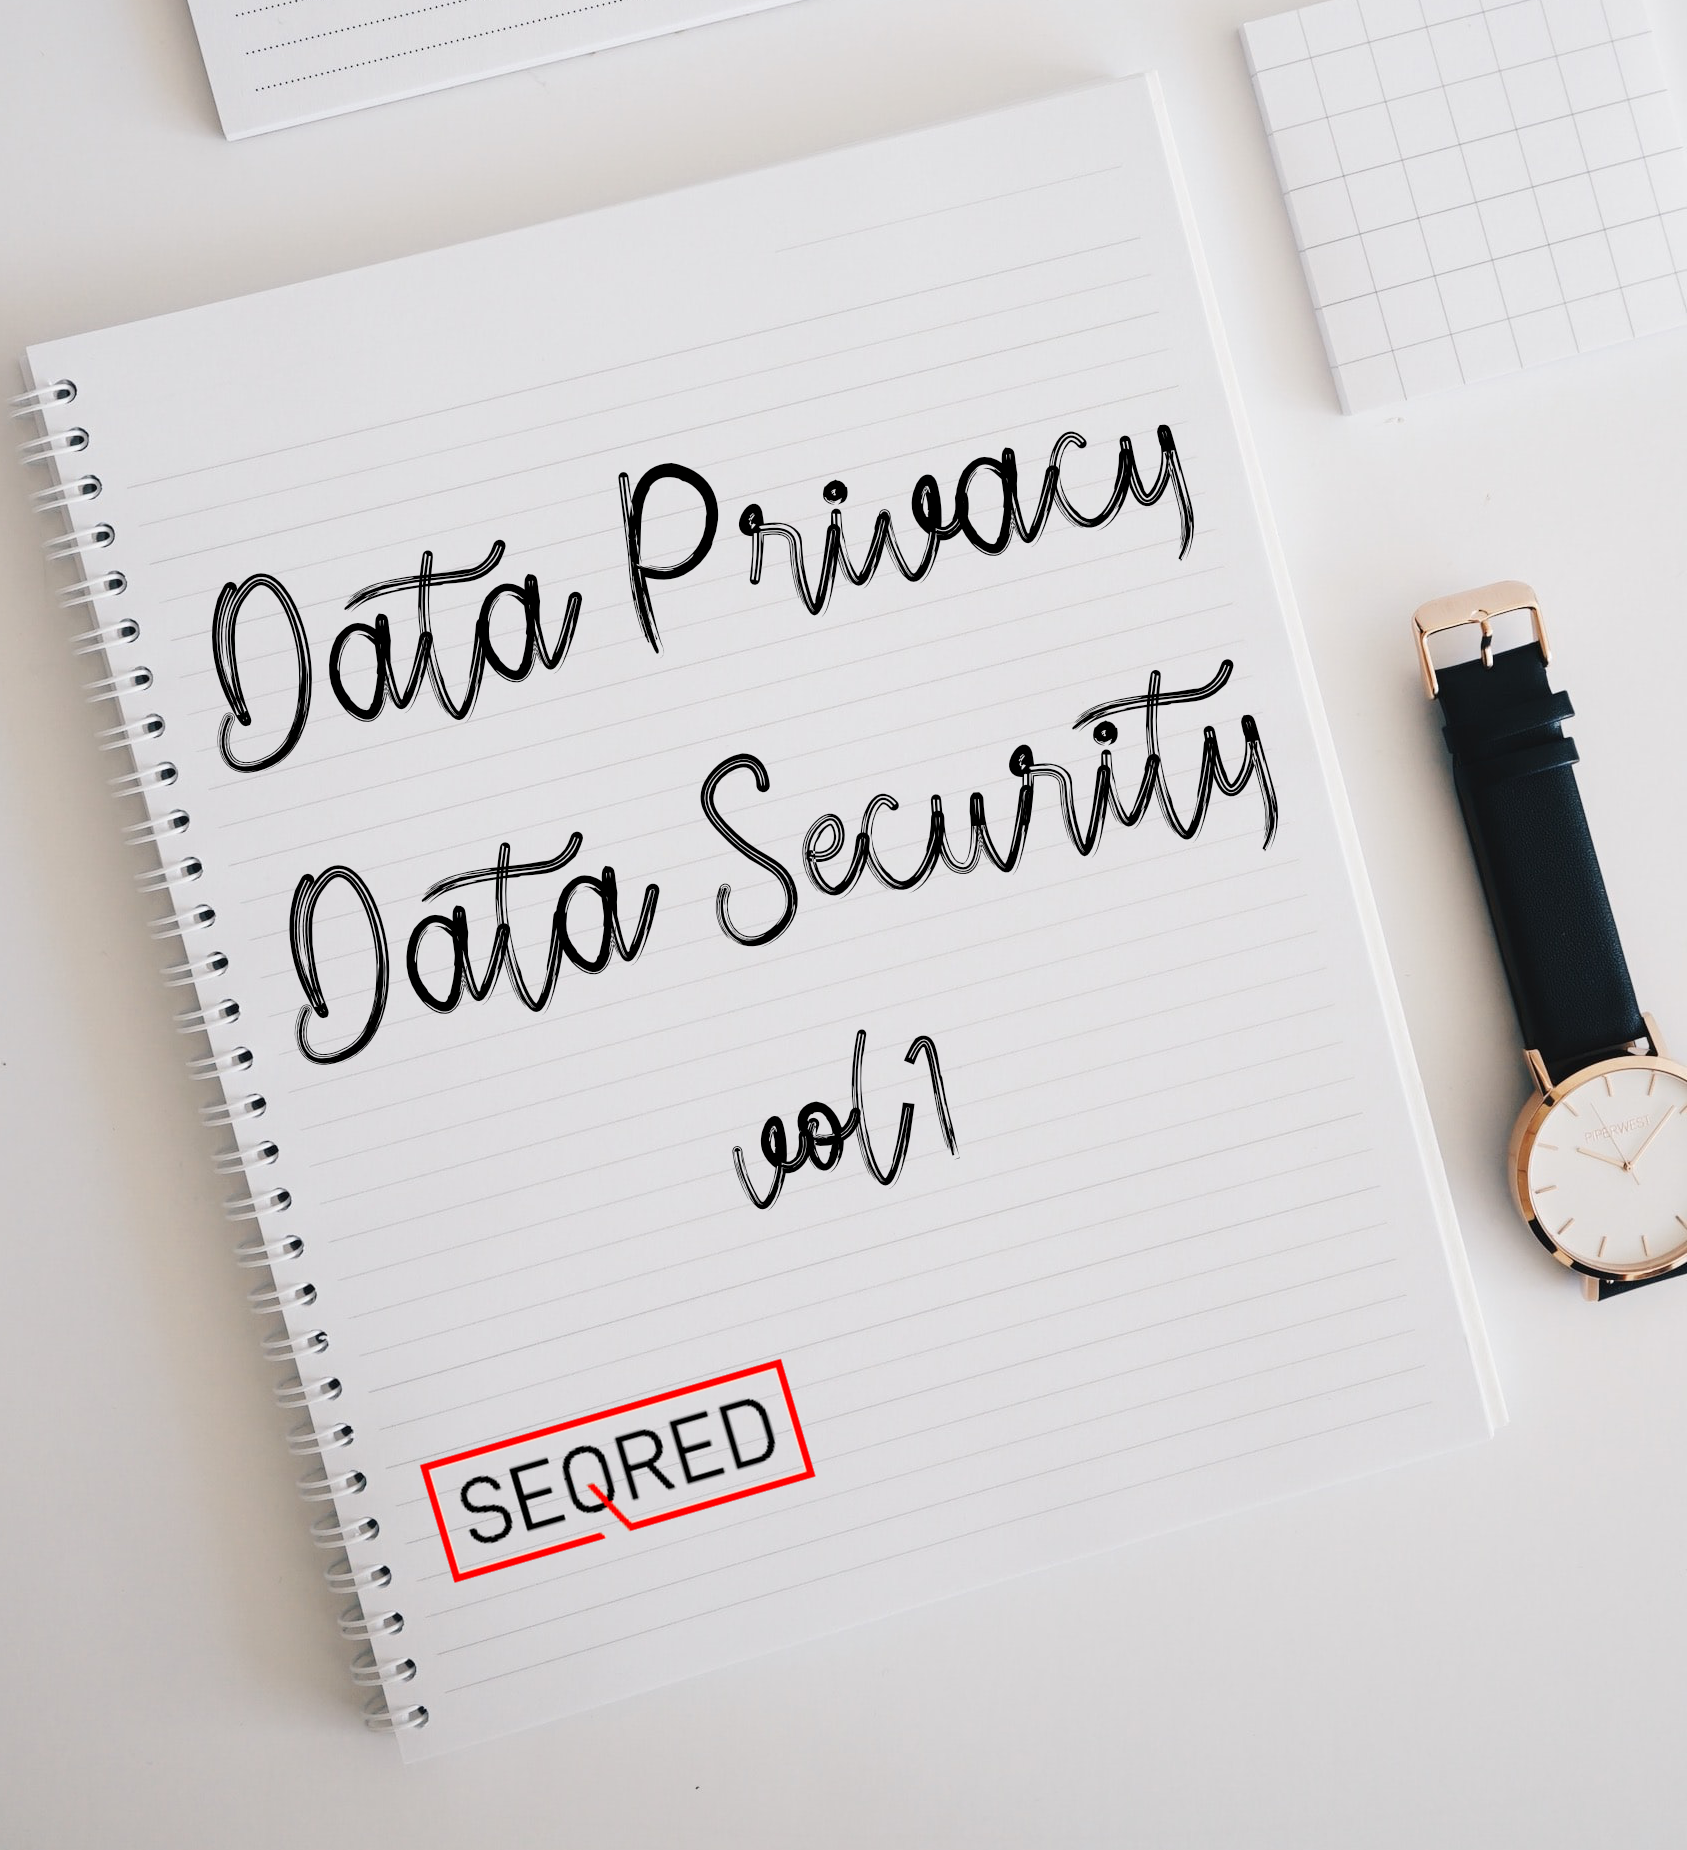 Data Privacy, Data Security. Vol. i